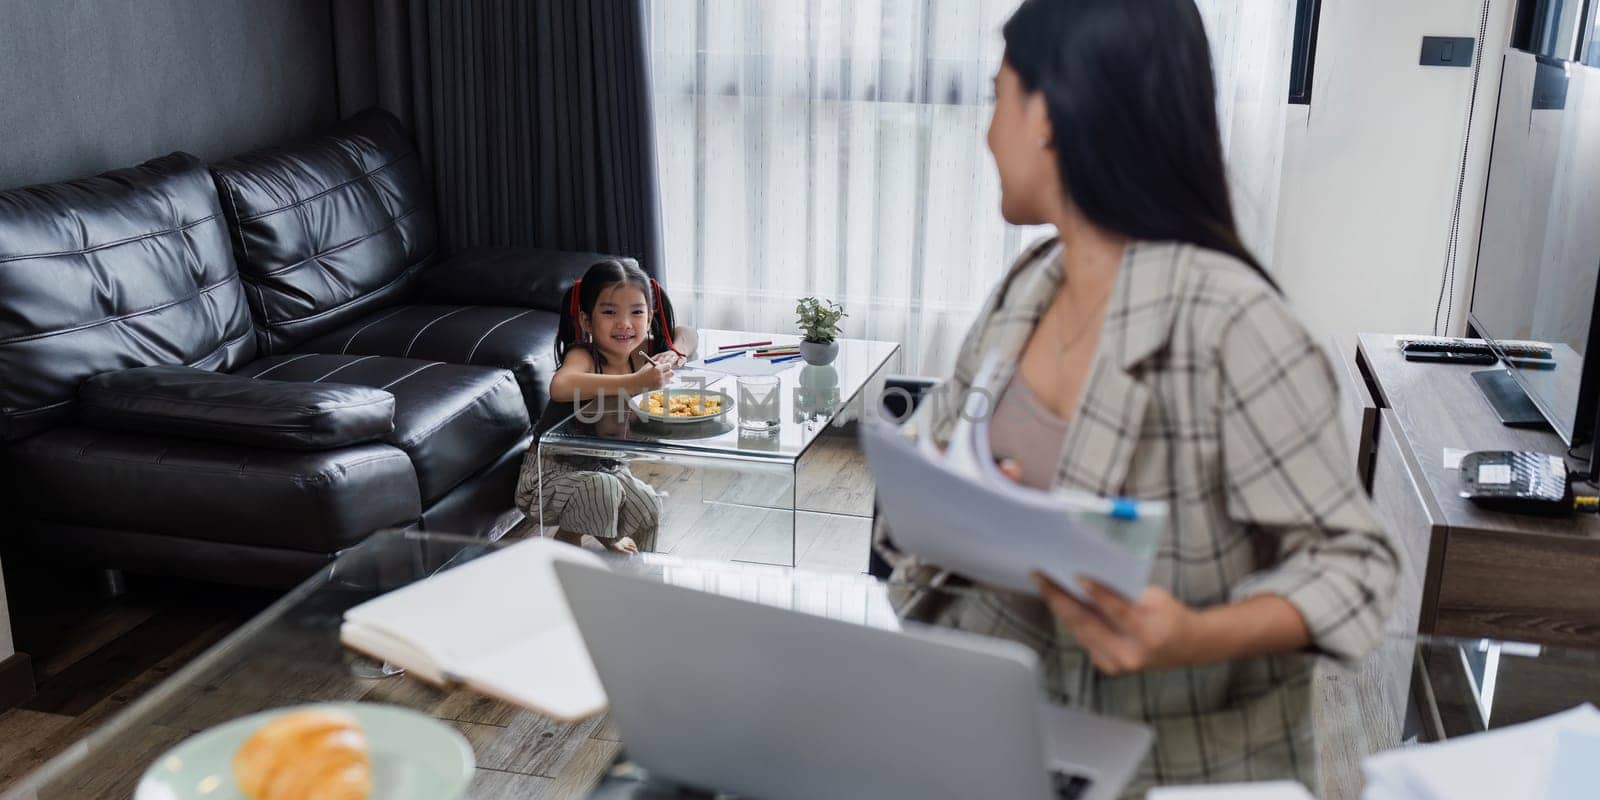 Business woman working from home and taking care of child while working, child doing activities in the background.